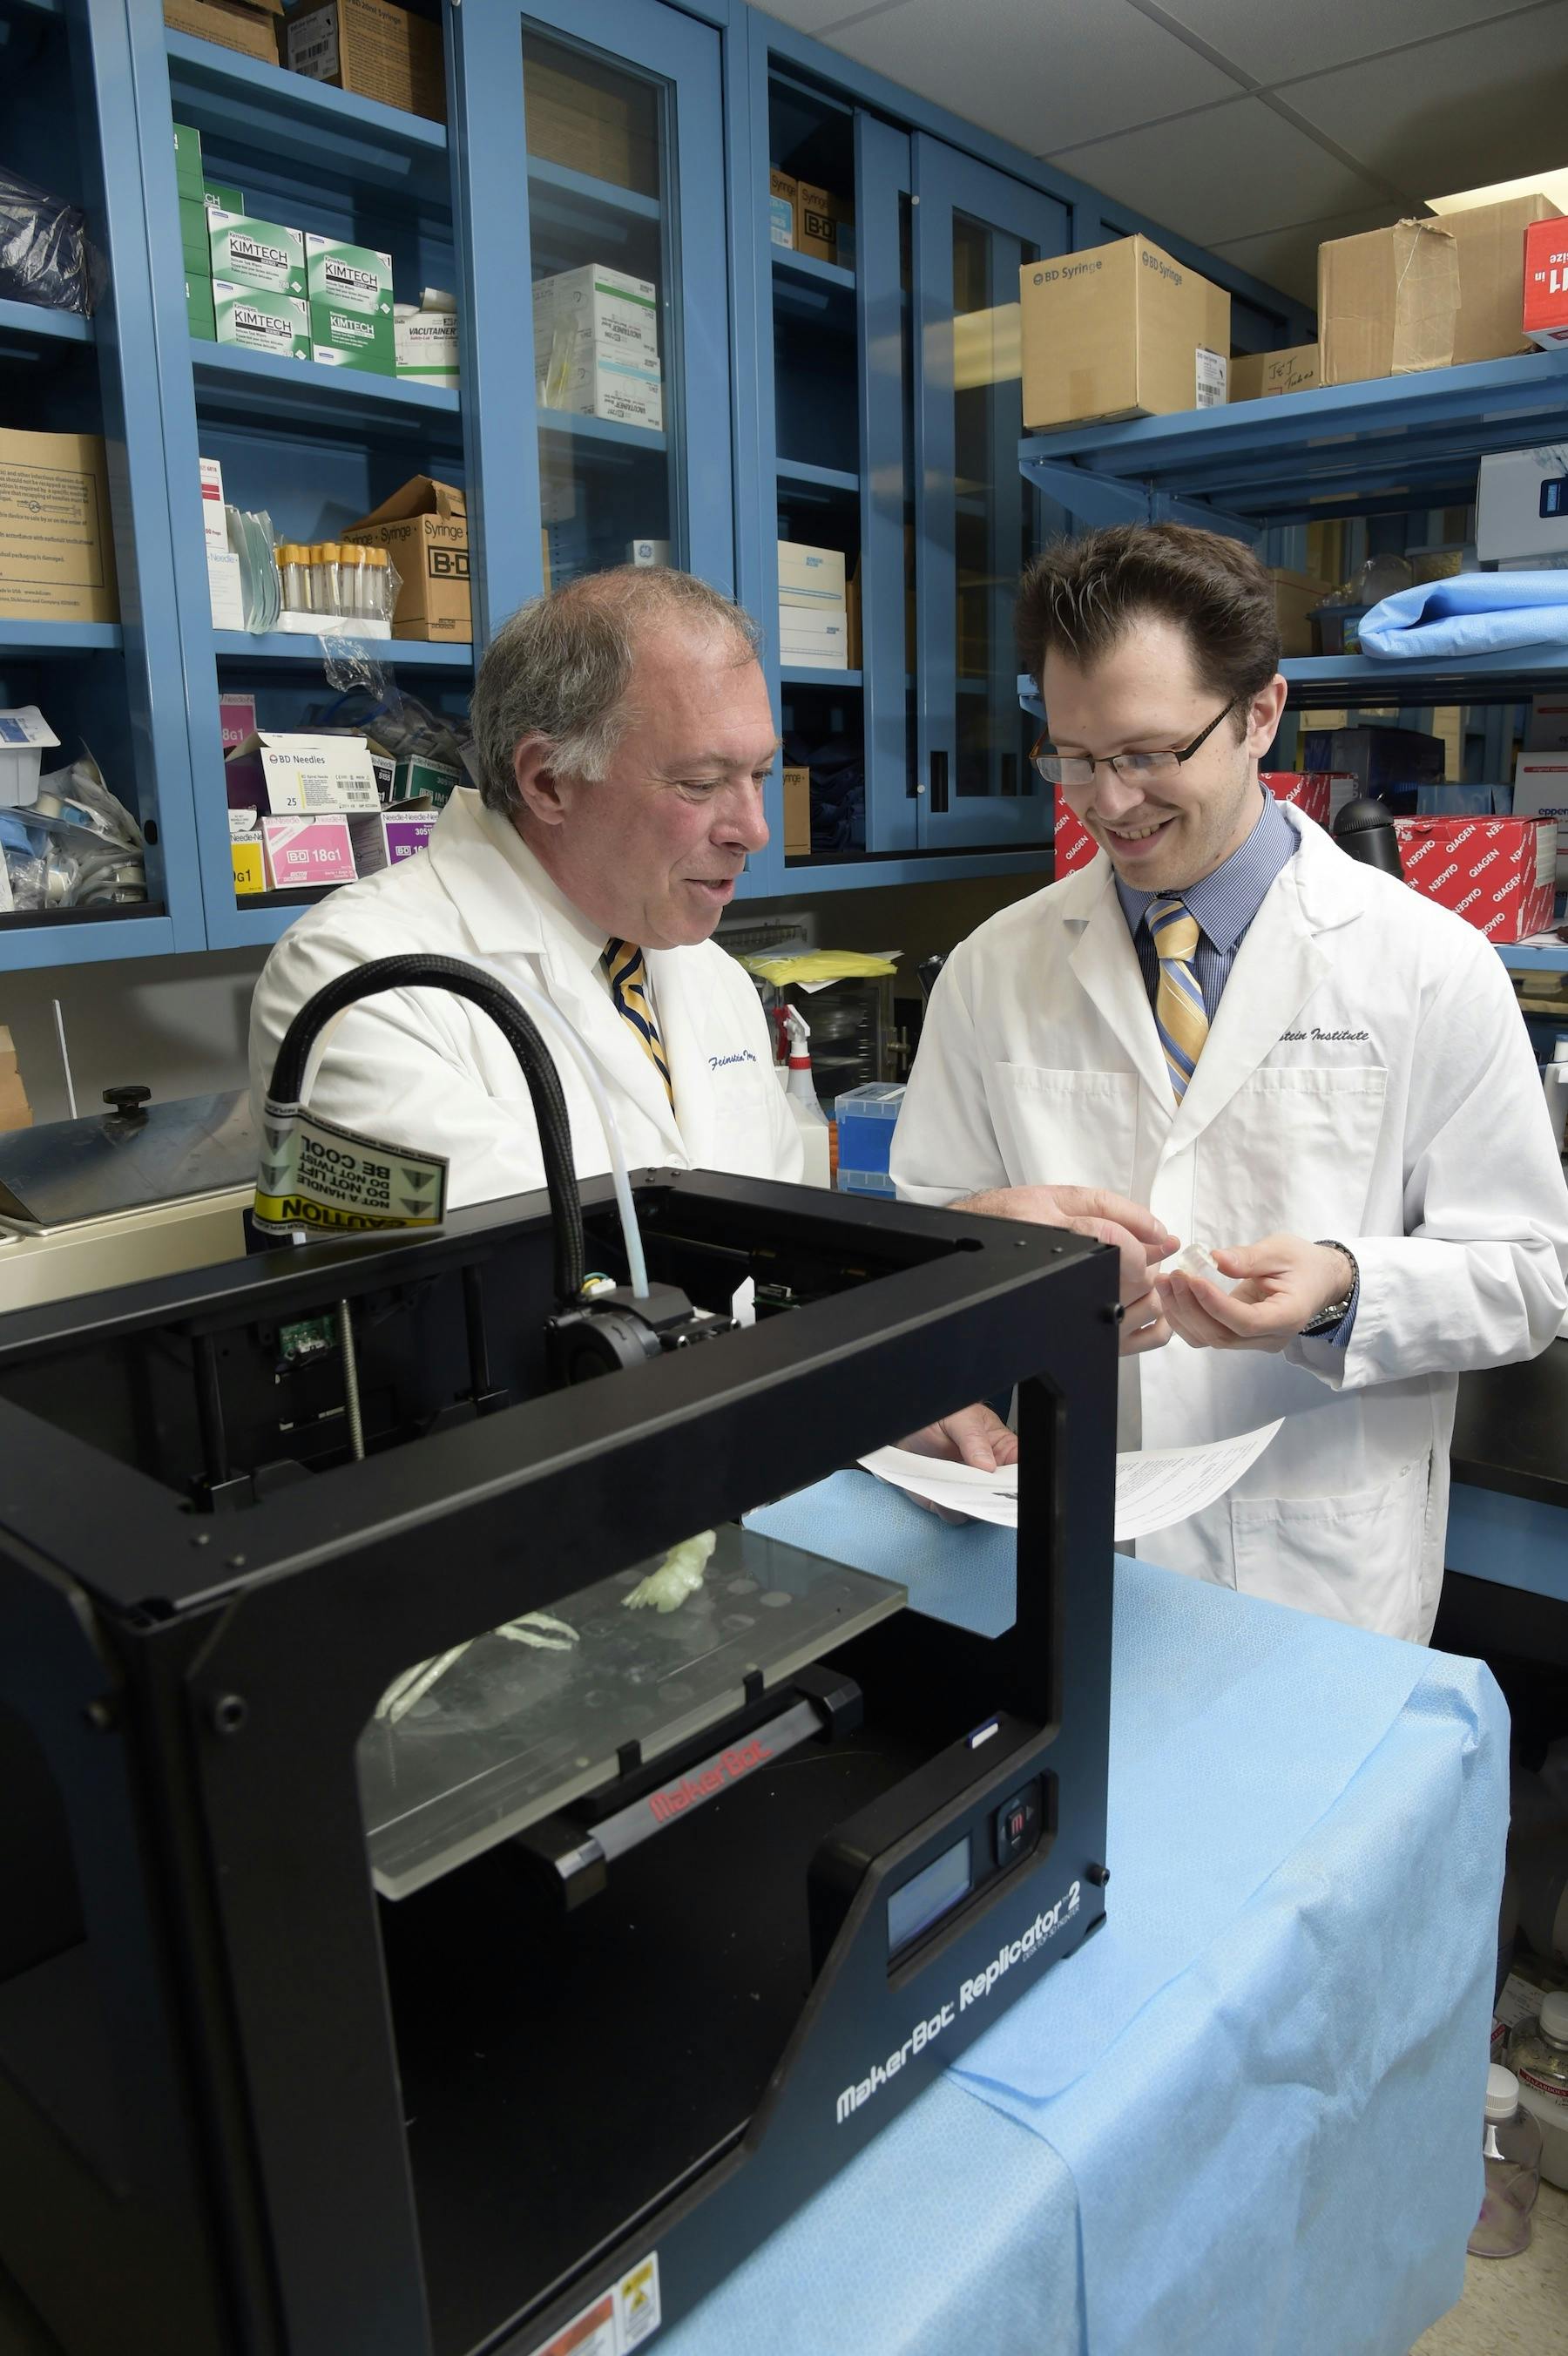 Daniel A. Grande, PhD, director of the Orthopedic Research Laboratory at the Feinstein Institute, and Todd Goldstein, an investigator at the Feinstein Institute, part of the North Shore-LIJ Health System, examine some of the 3D-printed parts they made on their MakerBot Replicator Desktop 3D Printer.